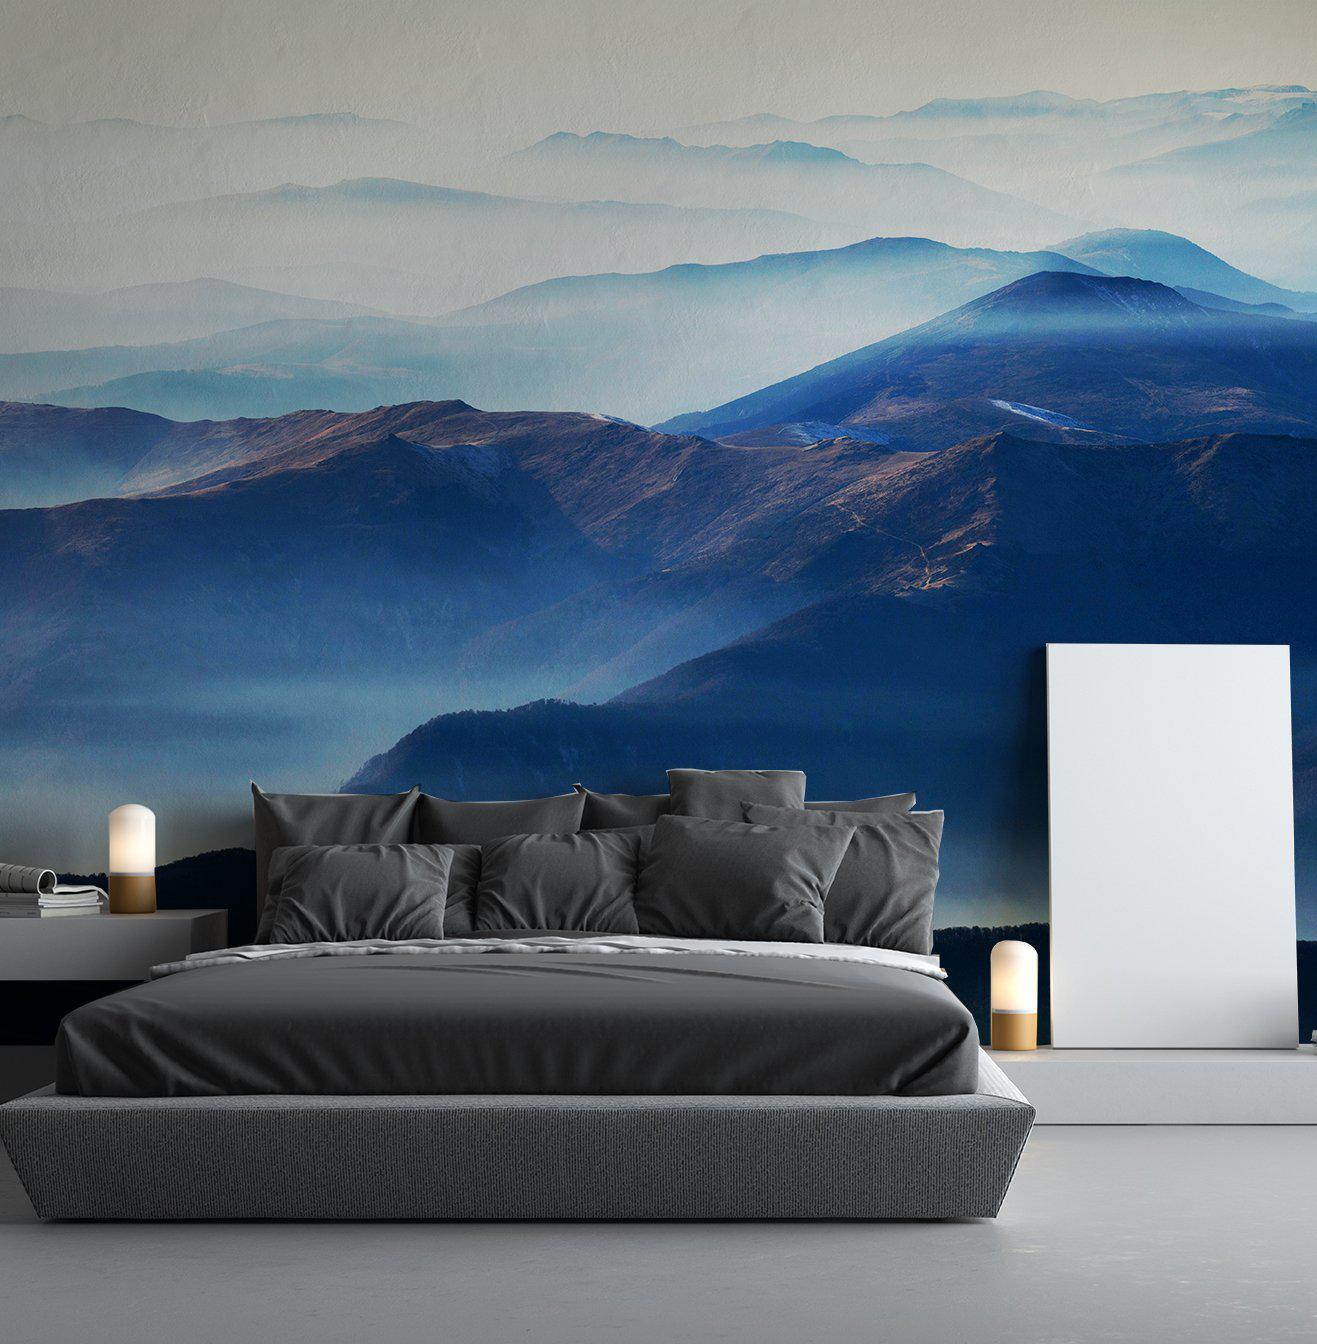 High Mountain Wall Mural-Wall Decor-ECO MURALS, LANDSCAPE WALLPAPERS, MOUNTAIN WALLPAPERS, MURALS, MURALS / WALLPAPERS-Forest Homes-Nature inspired decor-Nature decor